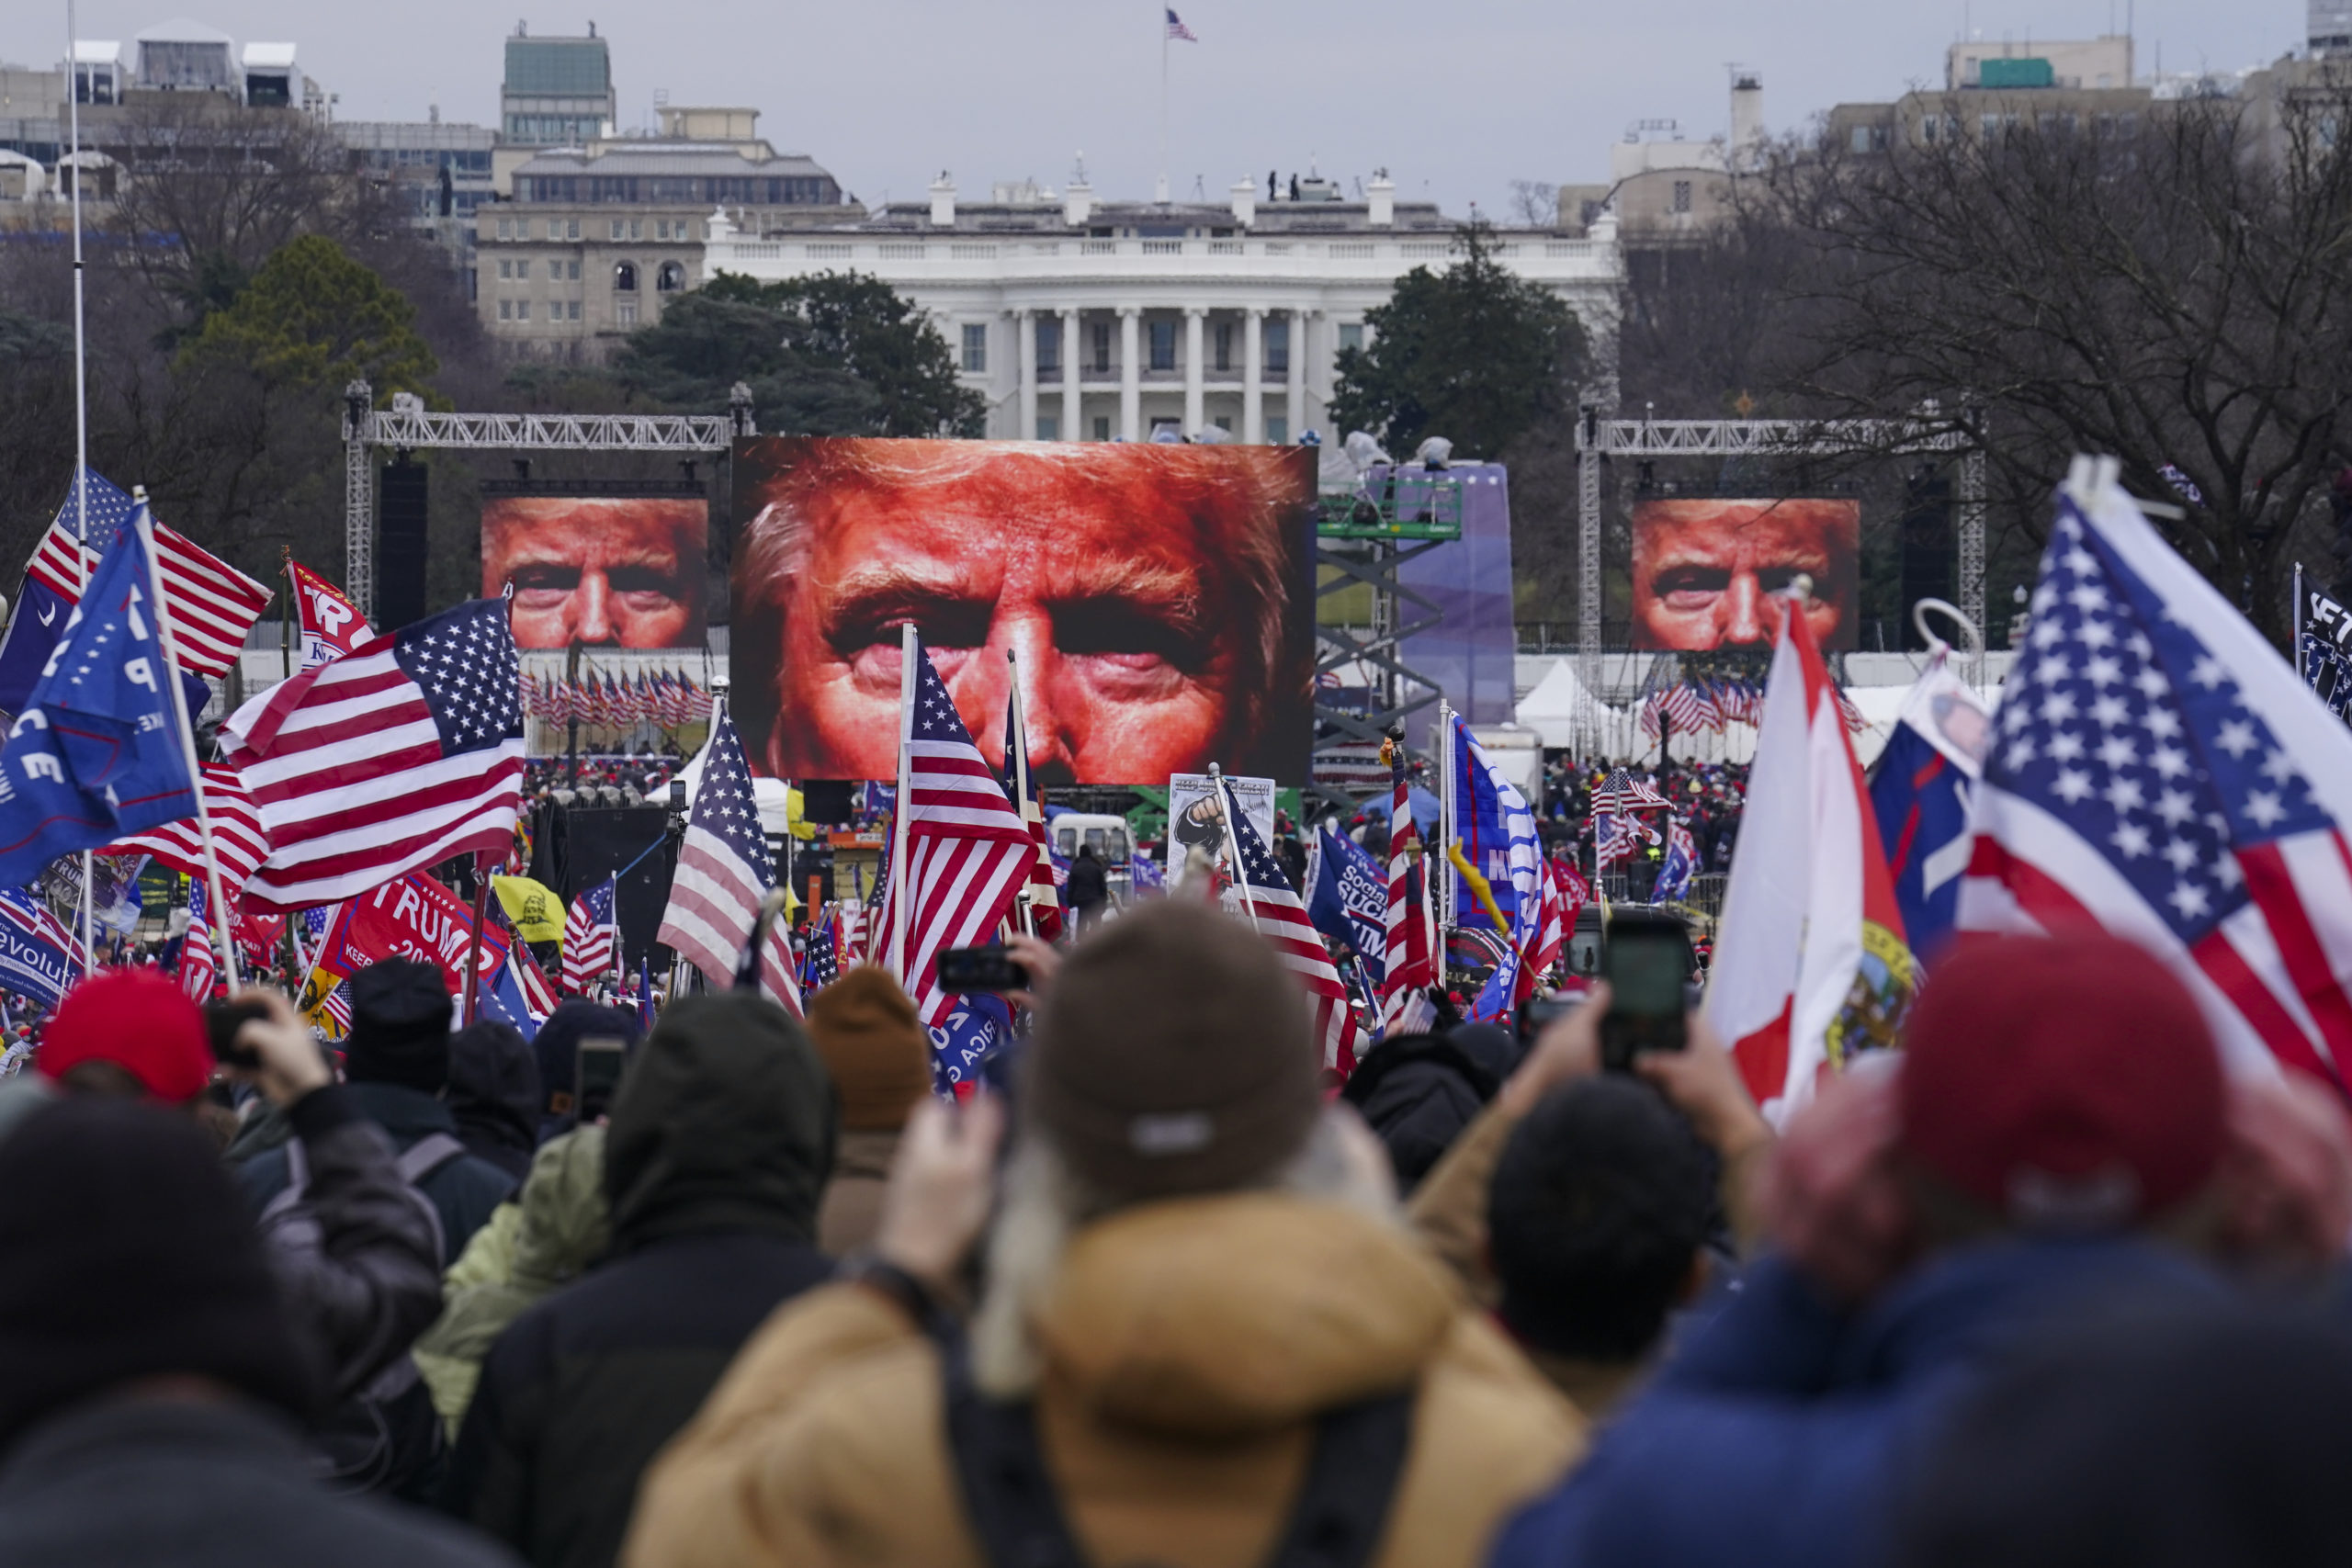 Trump supporters rally in Washington on Jan. 6. The self-coups in Latin America in the '90s can help U.S. journalists understand the media's role in preventing another insurrection